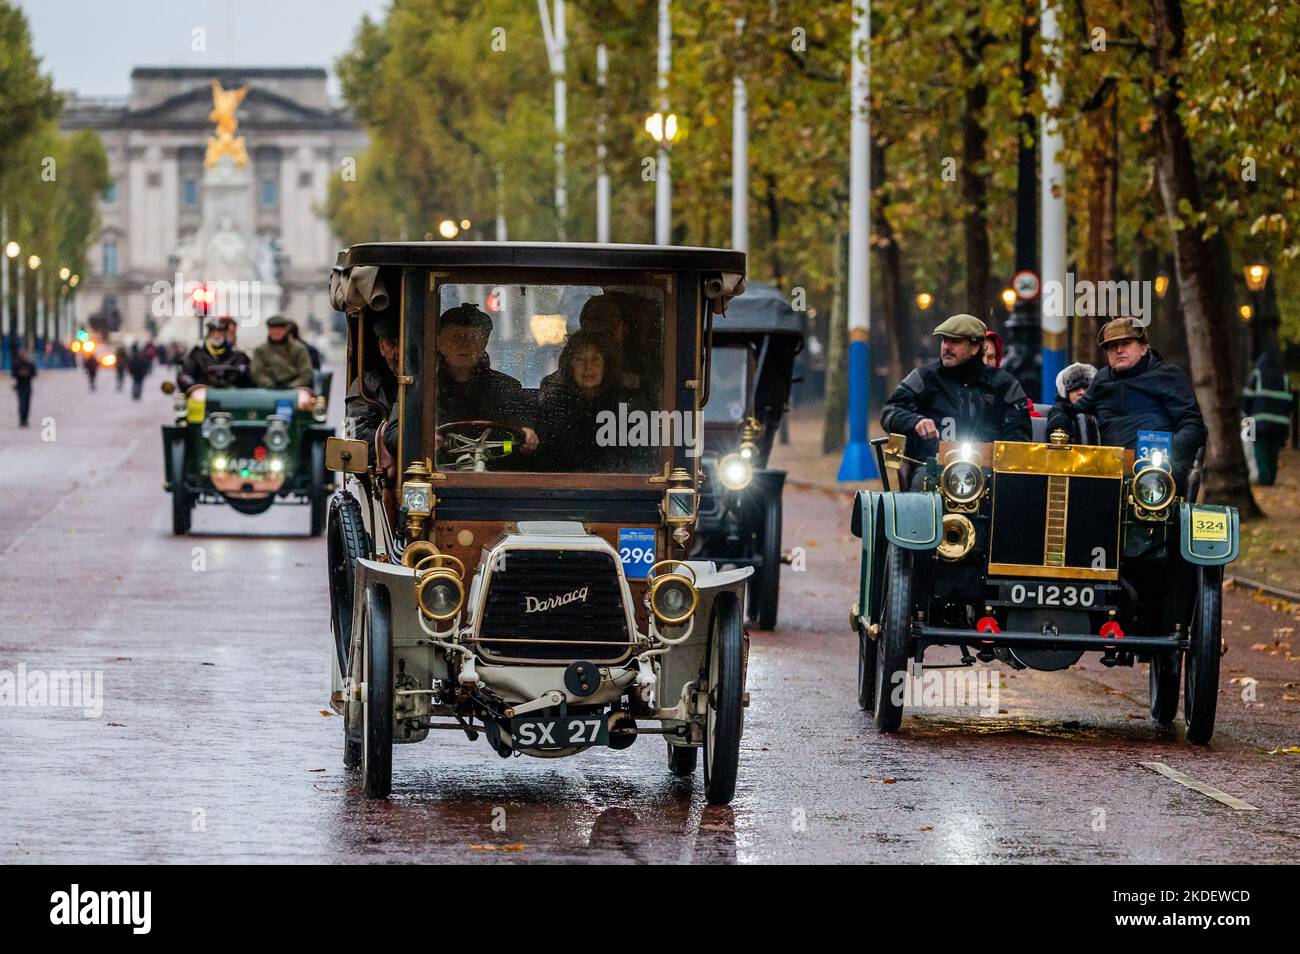 London, UK. 6th Nov, 2022. Going down the Mall - RM Sotheby's London to Brighton Veteran Car Run - 350 veteran cars, with many drivers in period costume make the 60-mile journey to the Sussex coast. Vehicles are mostly petrol-driven, but a few are powered by steam plus several very early electric vehicles - all built before 1905 Credit: Guy Bell/Alamy Live News Stock Photo